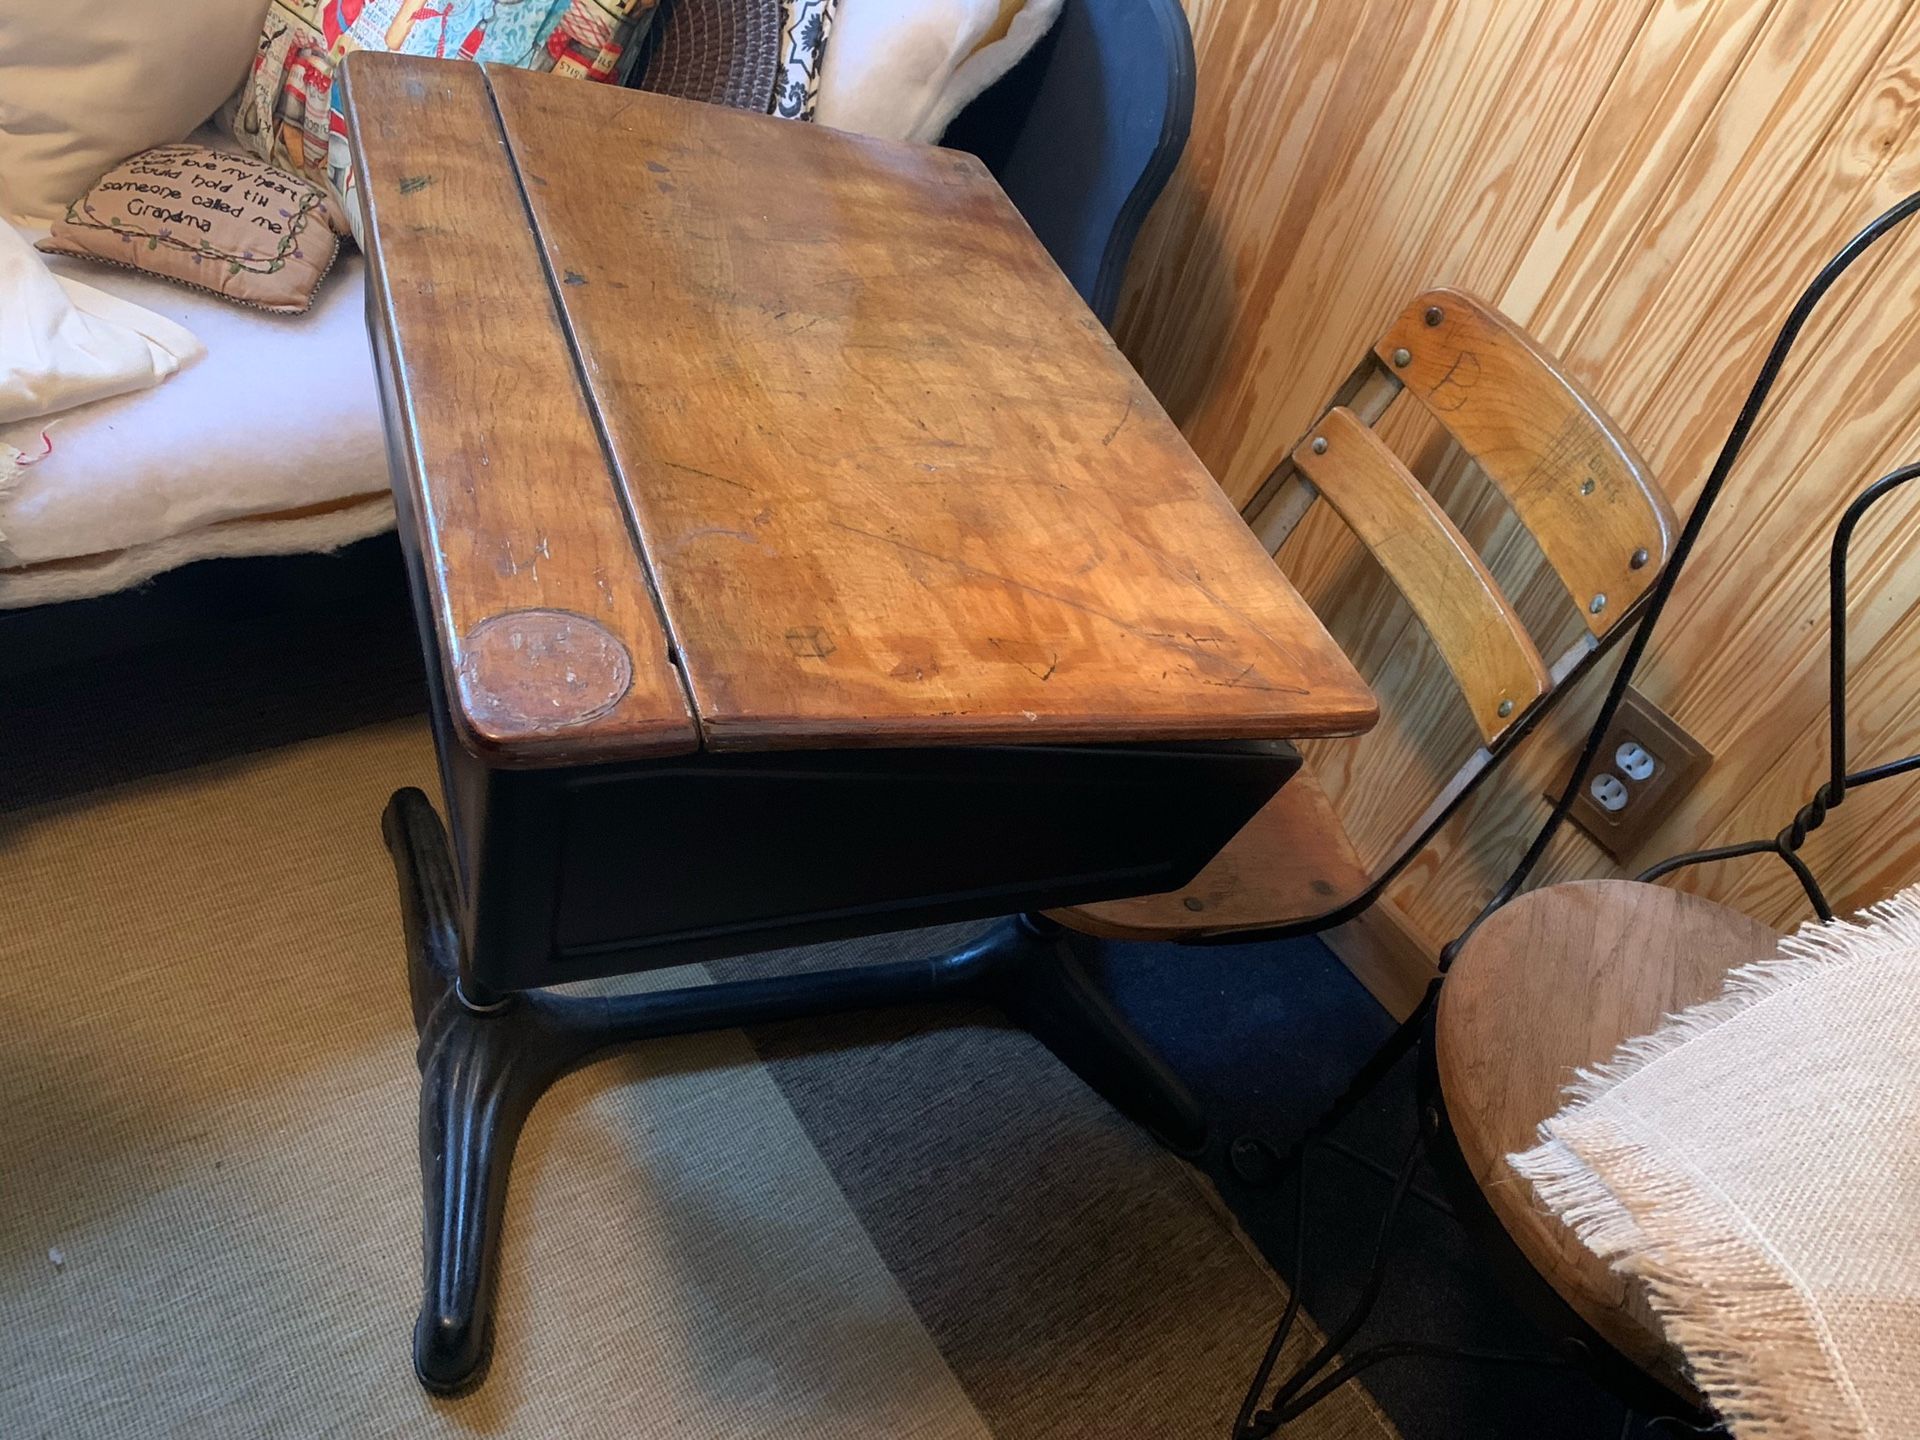 Antique school desk with attached chair